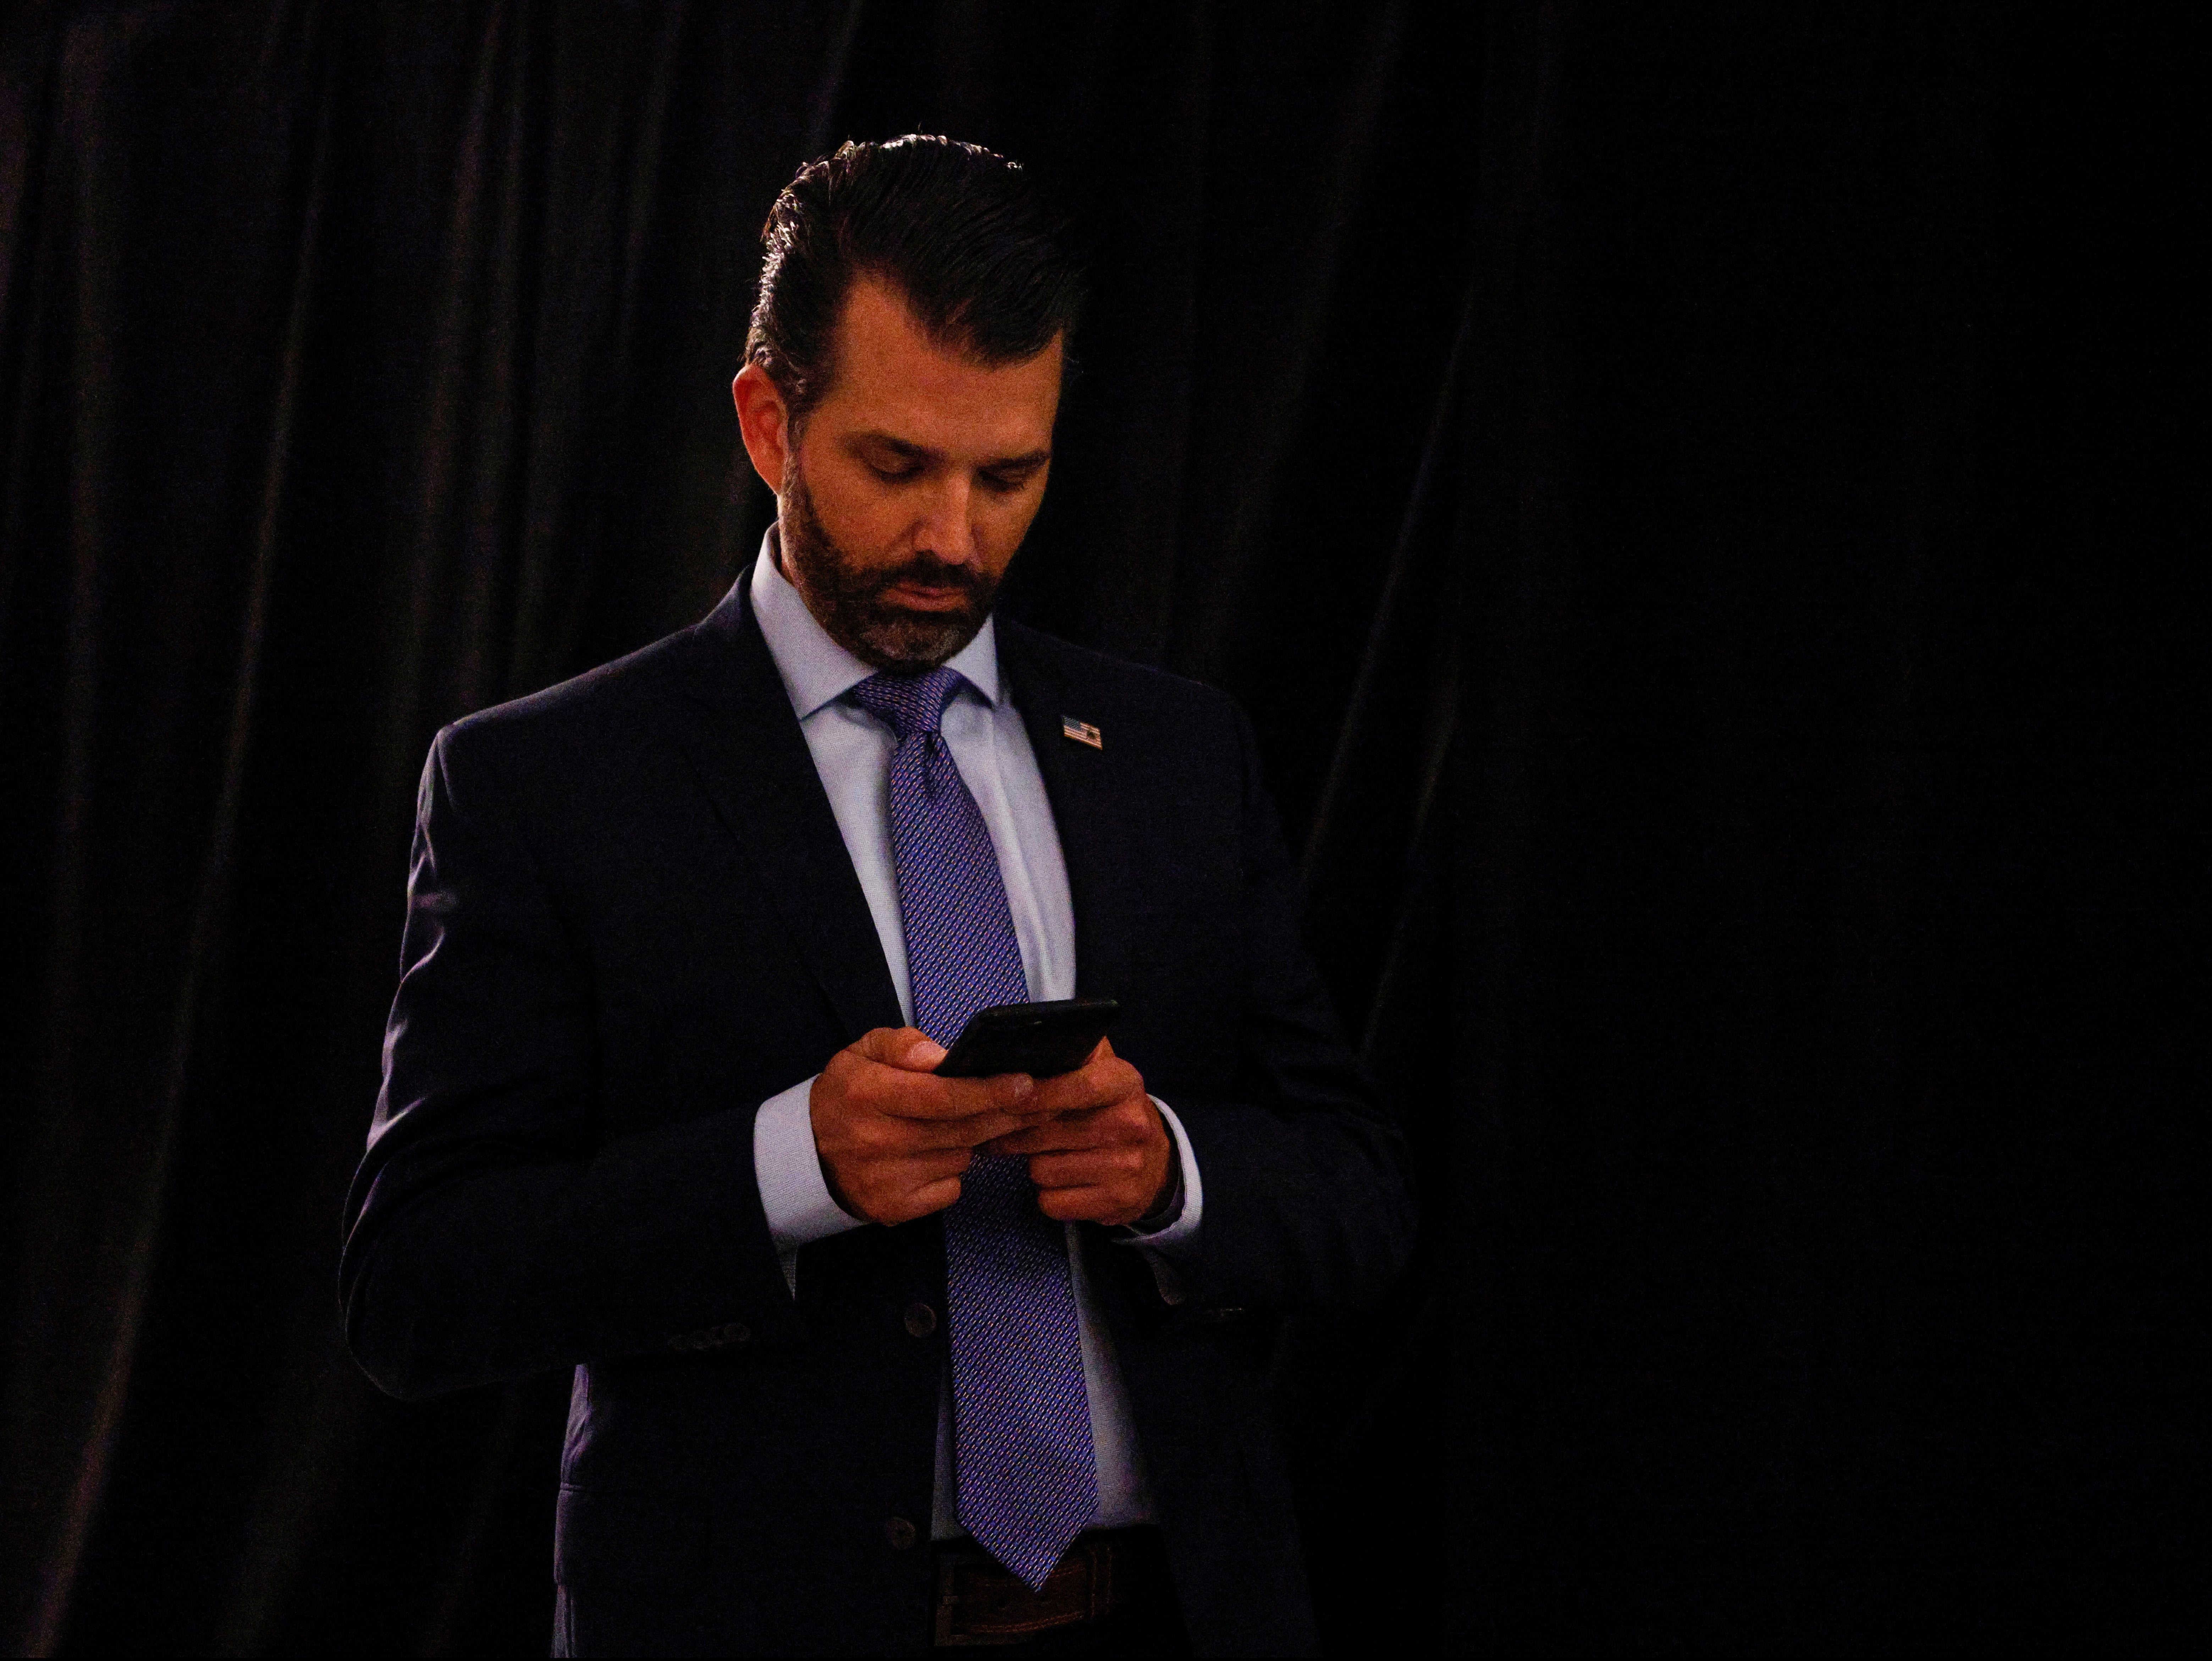 Donald Trump Jr uses his phone as he leaves after the first 2020 presidential campaign debate